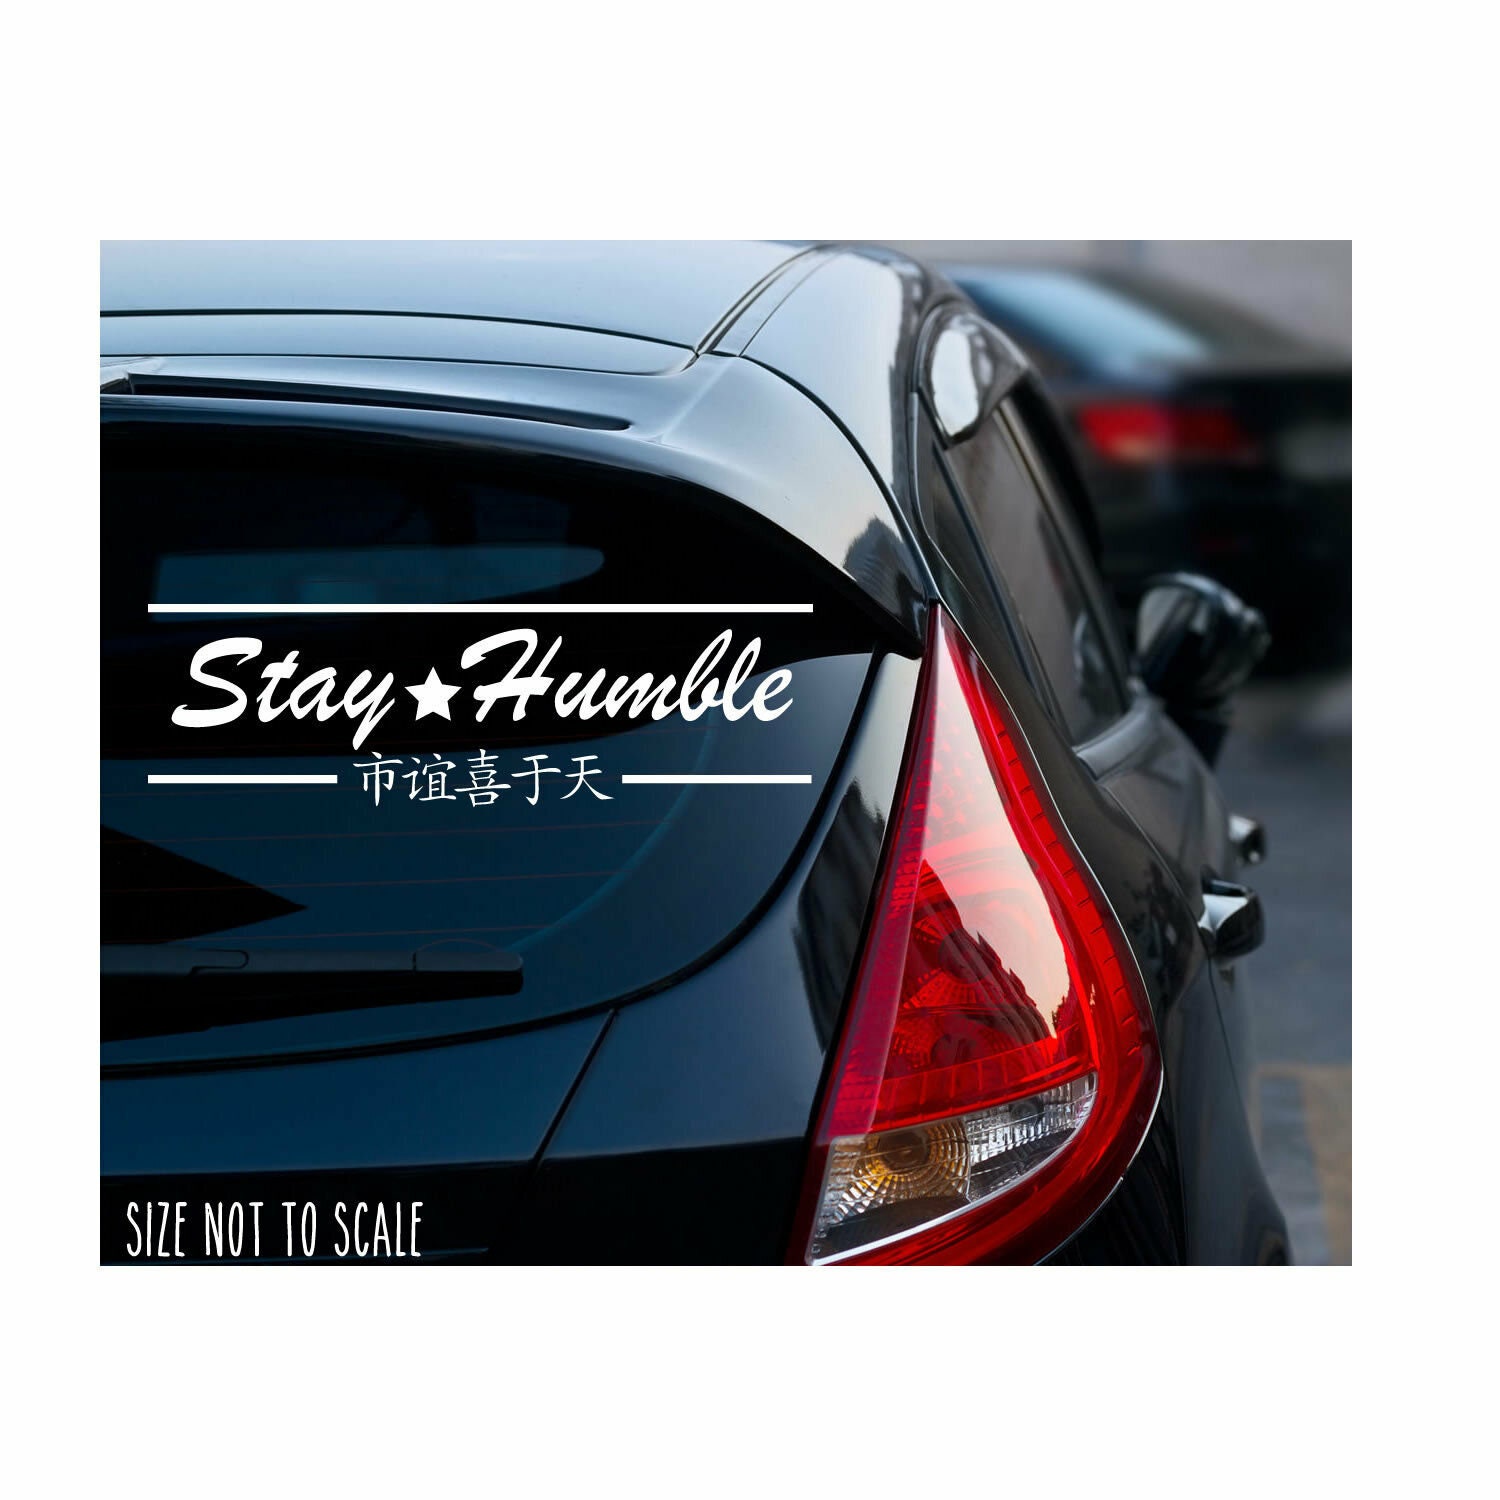 Gy,Stay Humble,Sticker,Decal,Drift,Lowered,Stance,Low,Illest,JDM,KDM,Windshield 